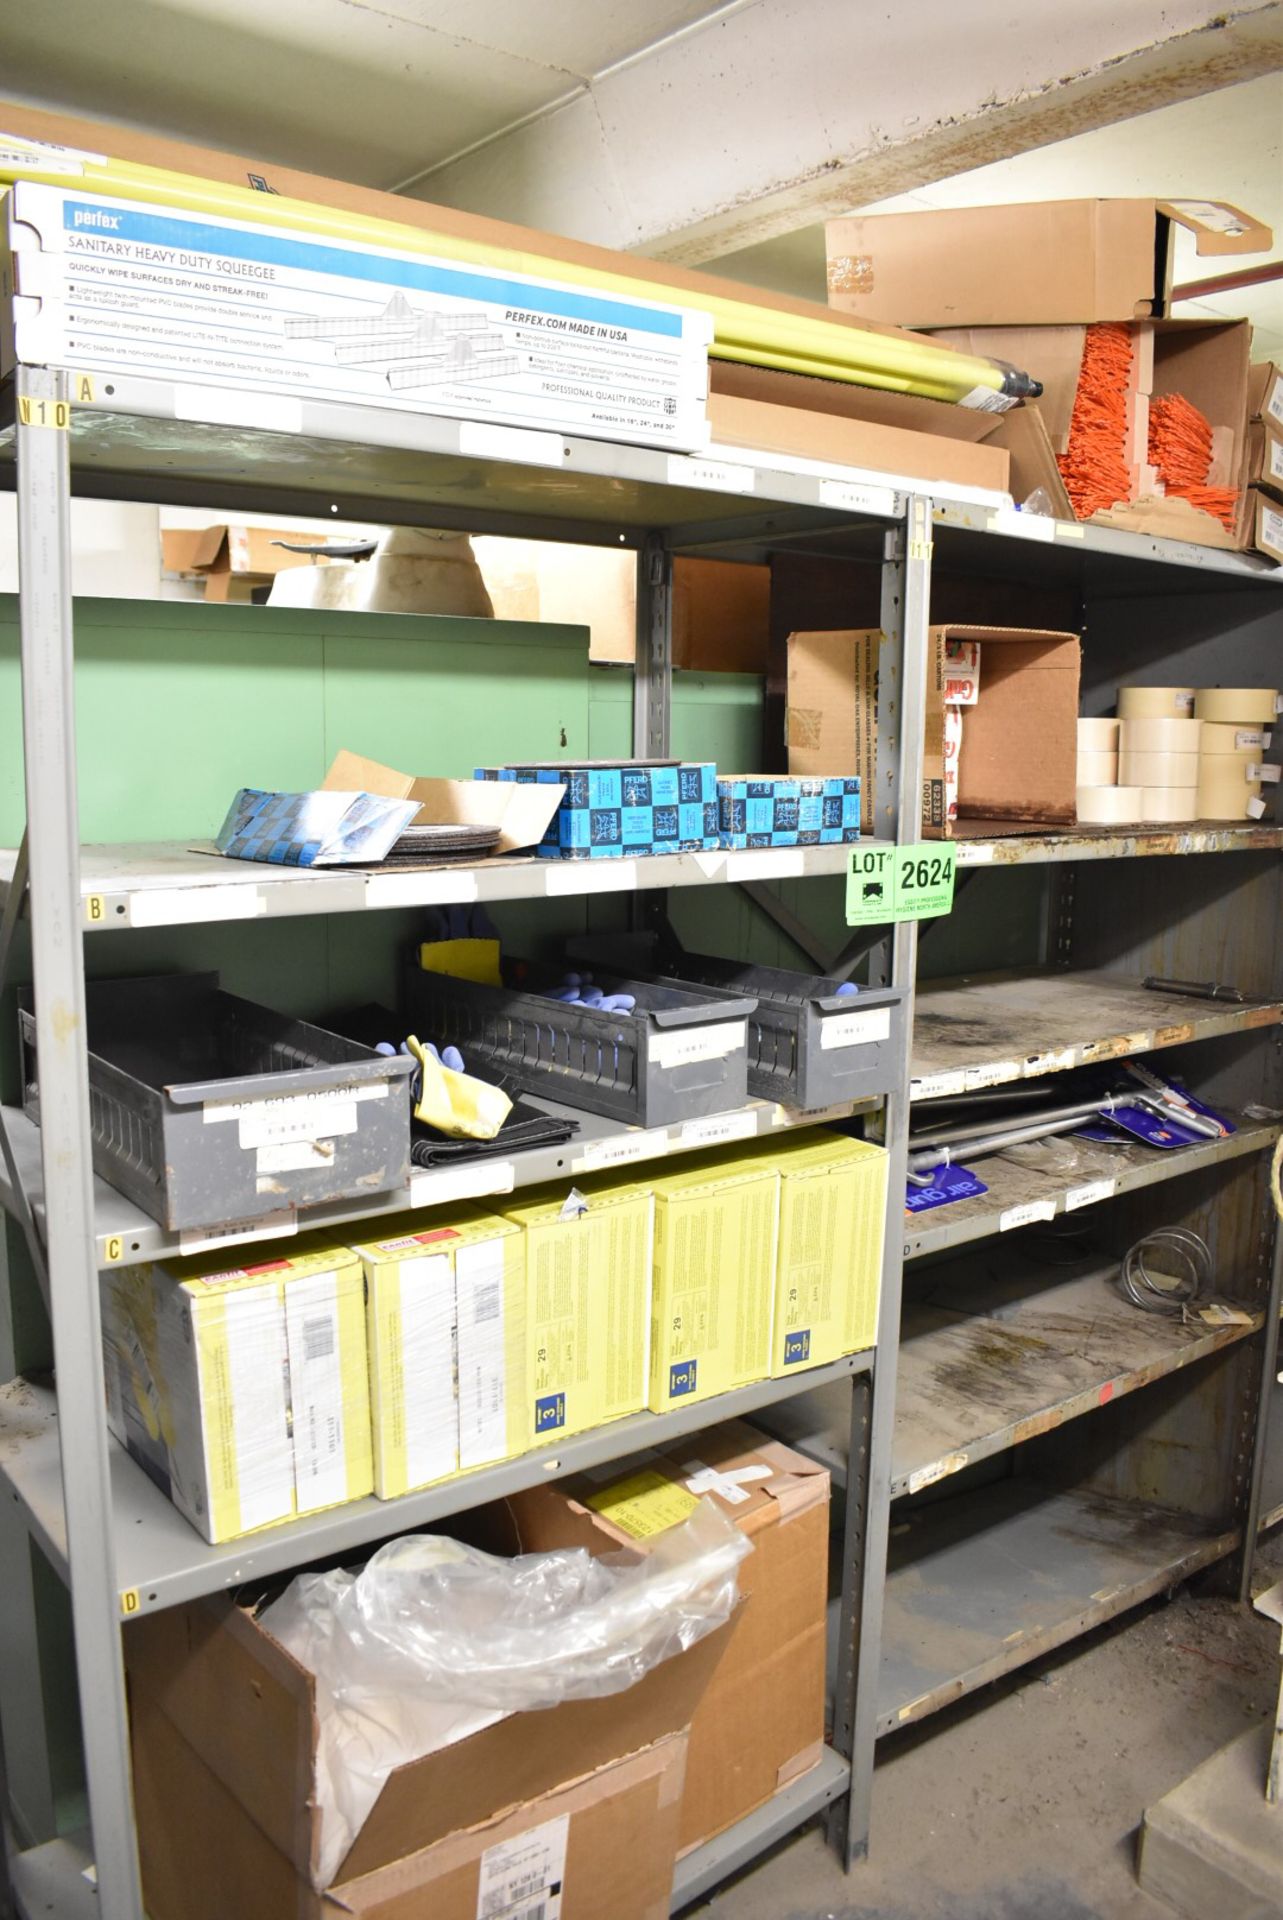 LOT/ SHOP SUPPLIES, CLEANING SUPPLIES, PPE WITH (3) SECTIONS OF ADJUSTABLE STEEL SHELVES [RIGGING